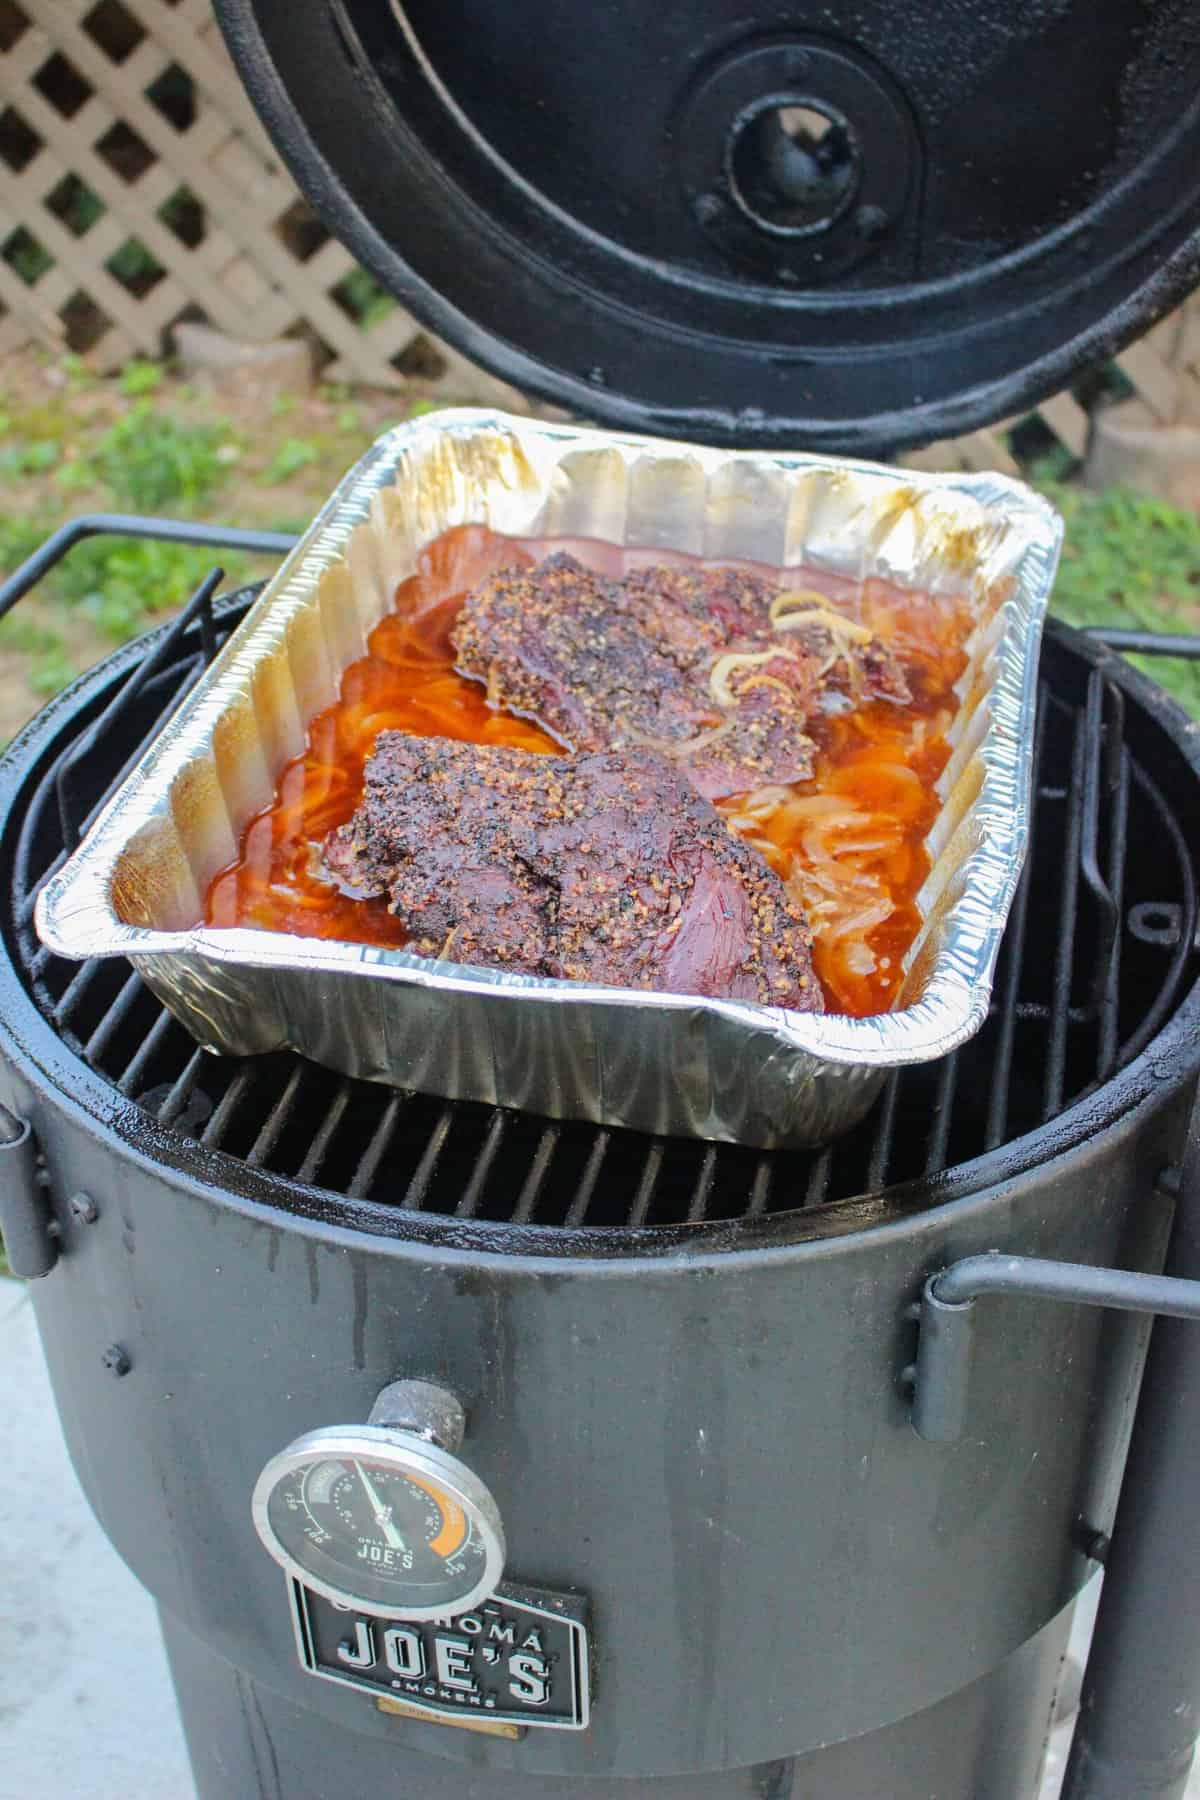 cooked chuck roasts in a foil bin on a smoker